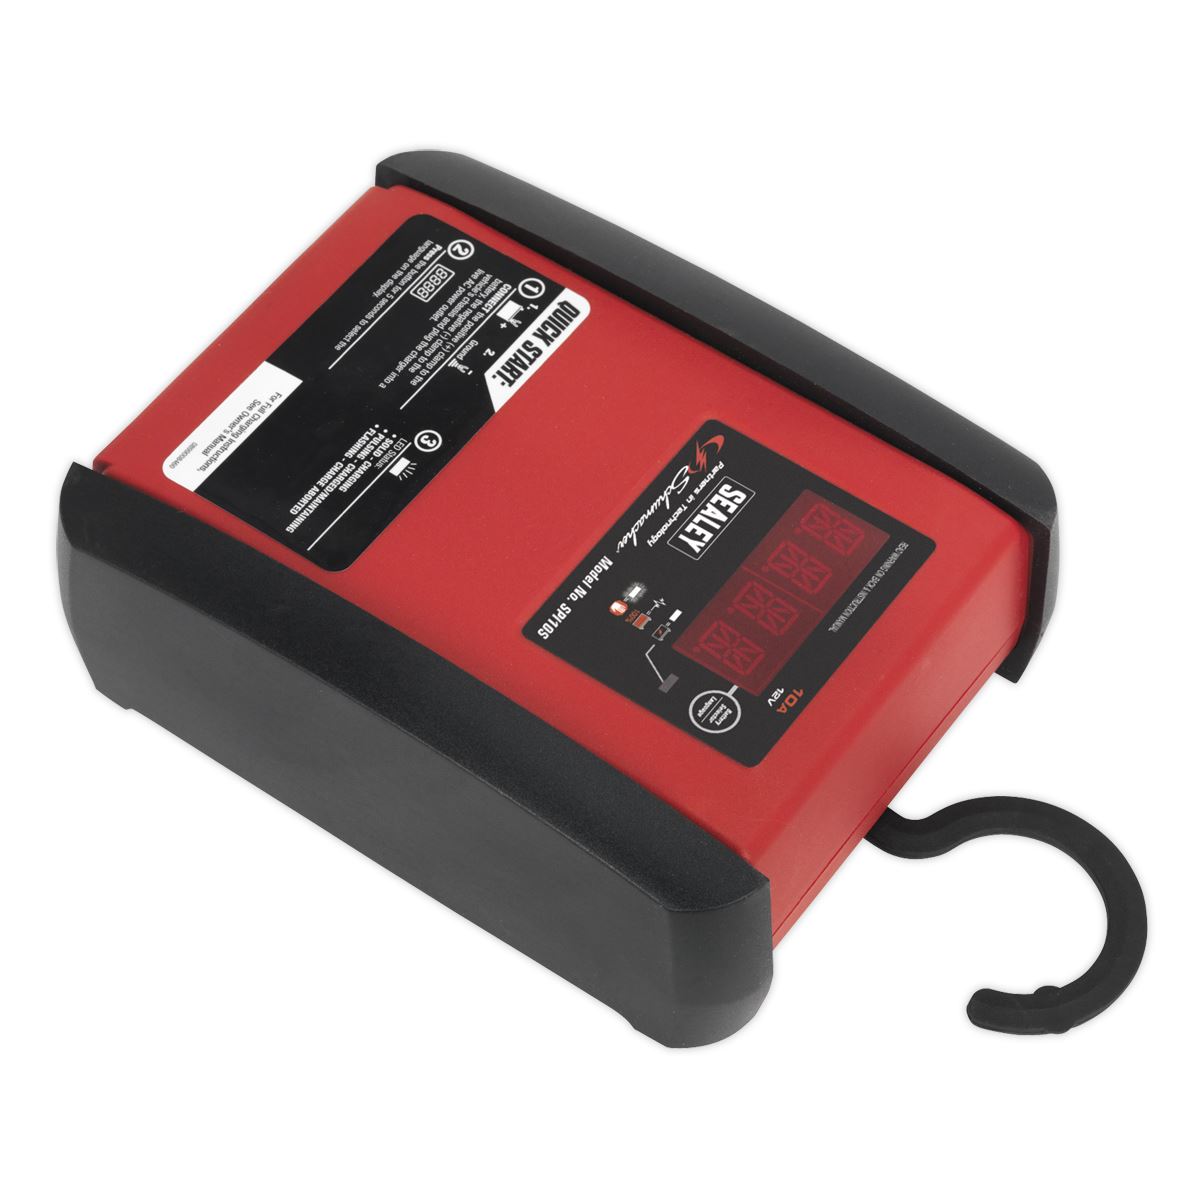 Sealey Intelligent Speed Charge Battery Charger/Maintainer 10A 12V